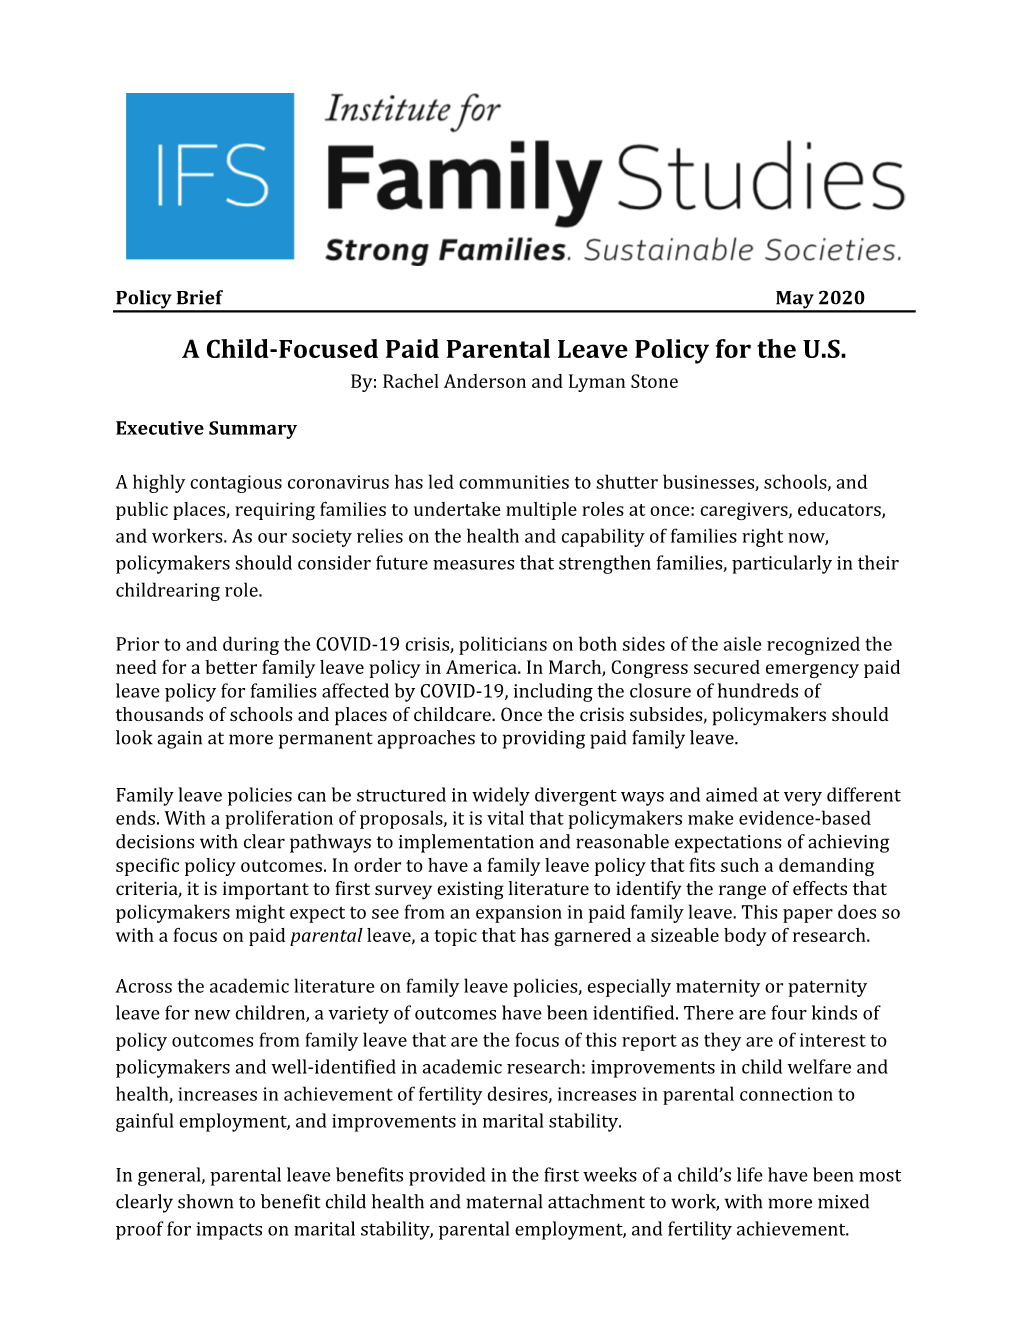 A Child-Focused Paid Parental Leave Policy for the U.S. By: Rachel Anderson and Lyman Stone